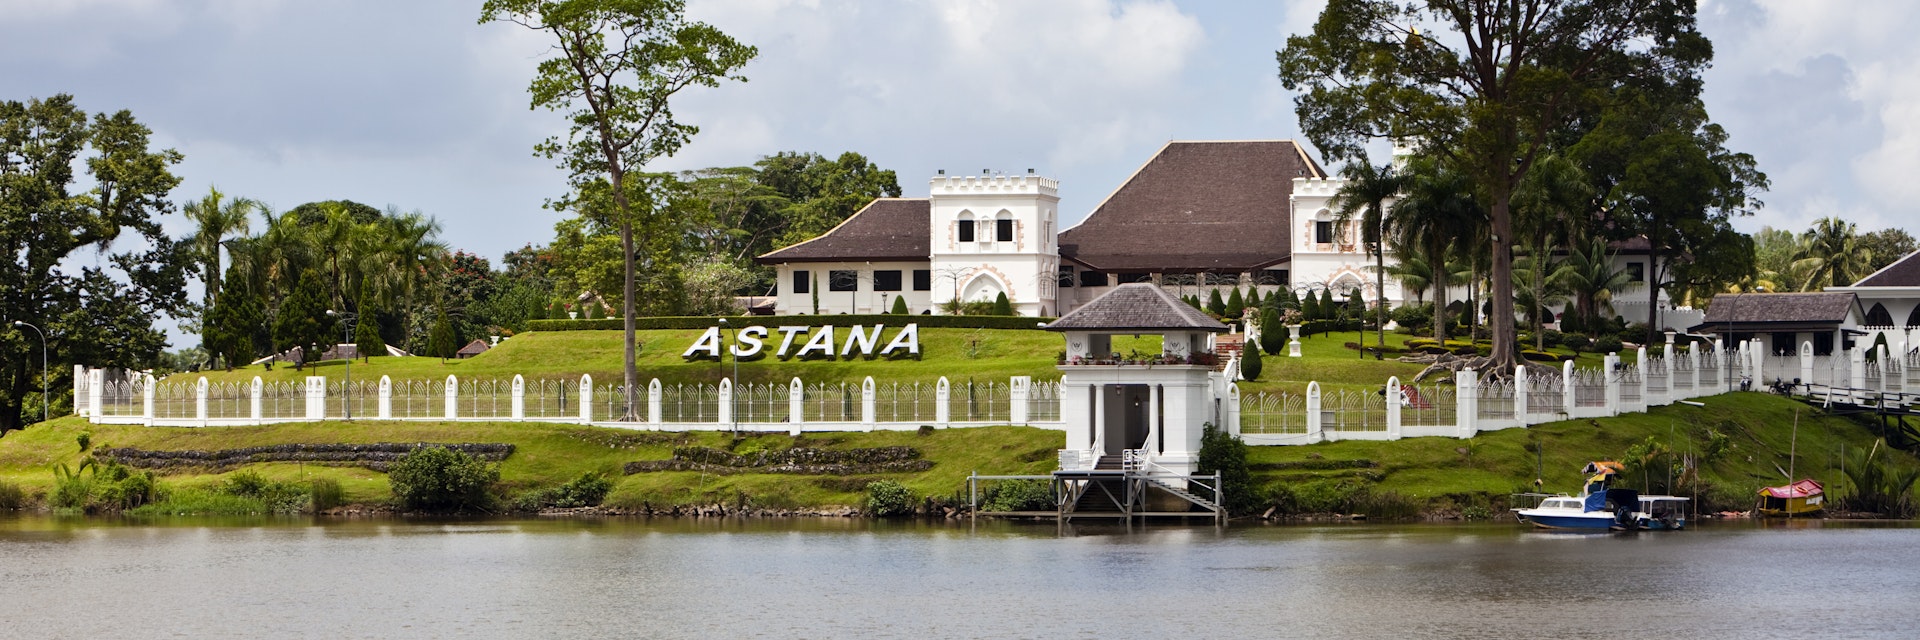 The Astana (Palace) built by Charles Brooke in 1870, now the residence of the state Governor. Kuching, Sarawak, Borneo, Malaysia